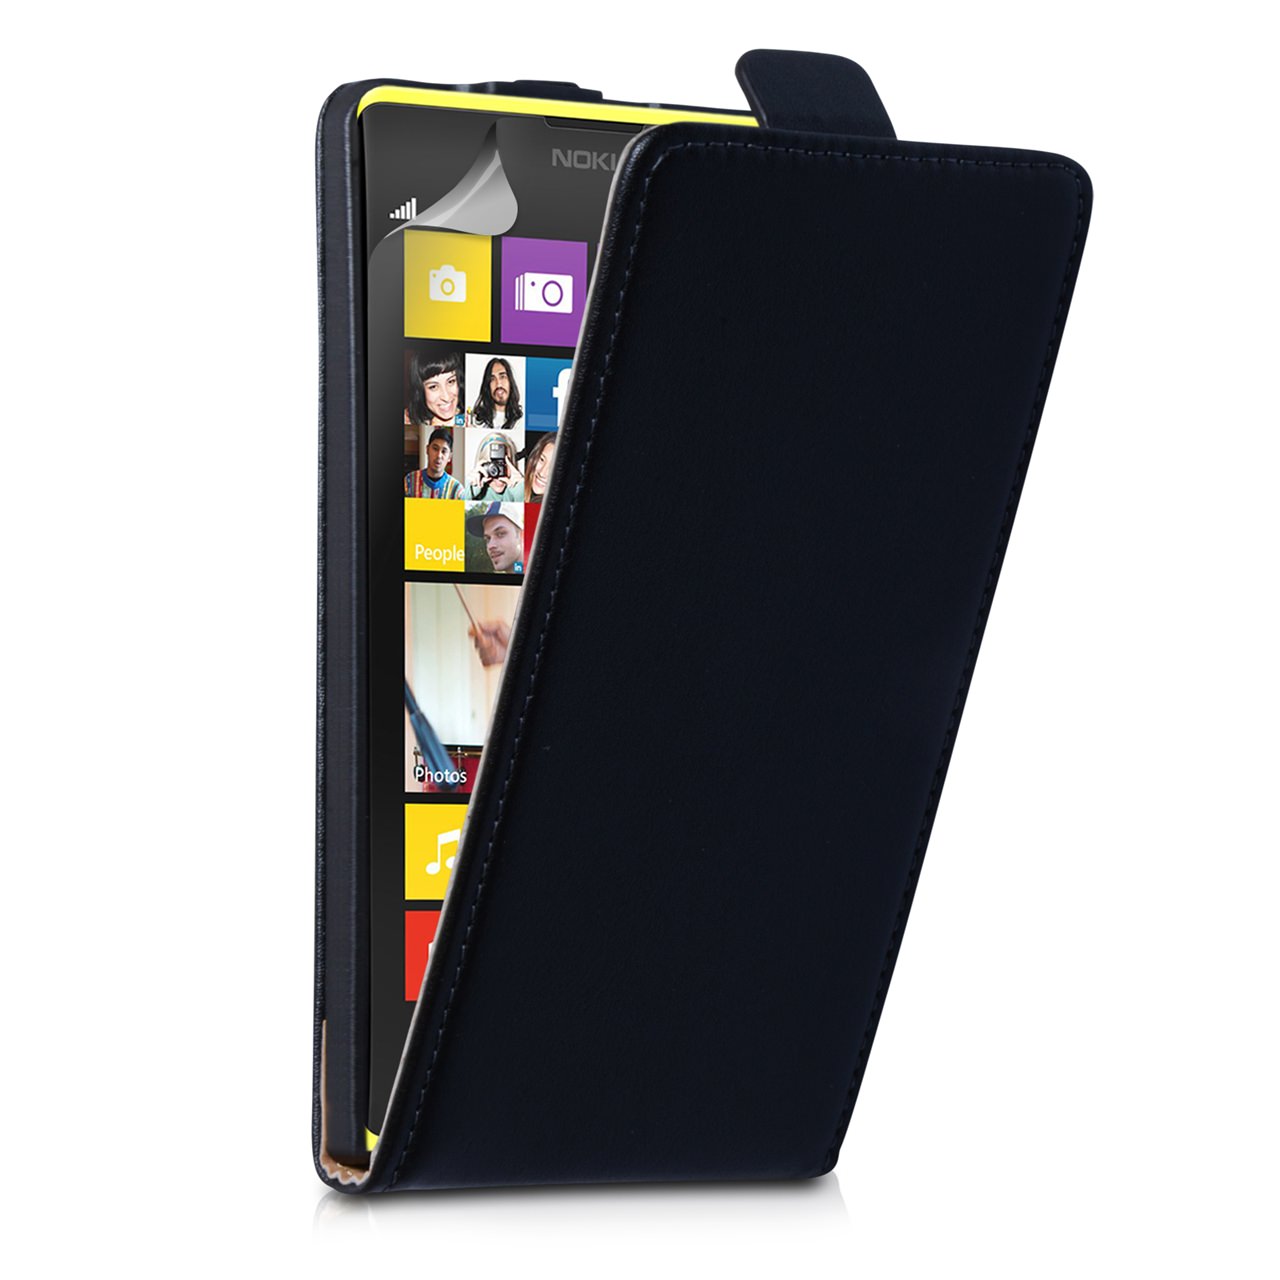 YouSave Accessories Nokia Lumia 1020 Real Leather Flip Case - Black